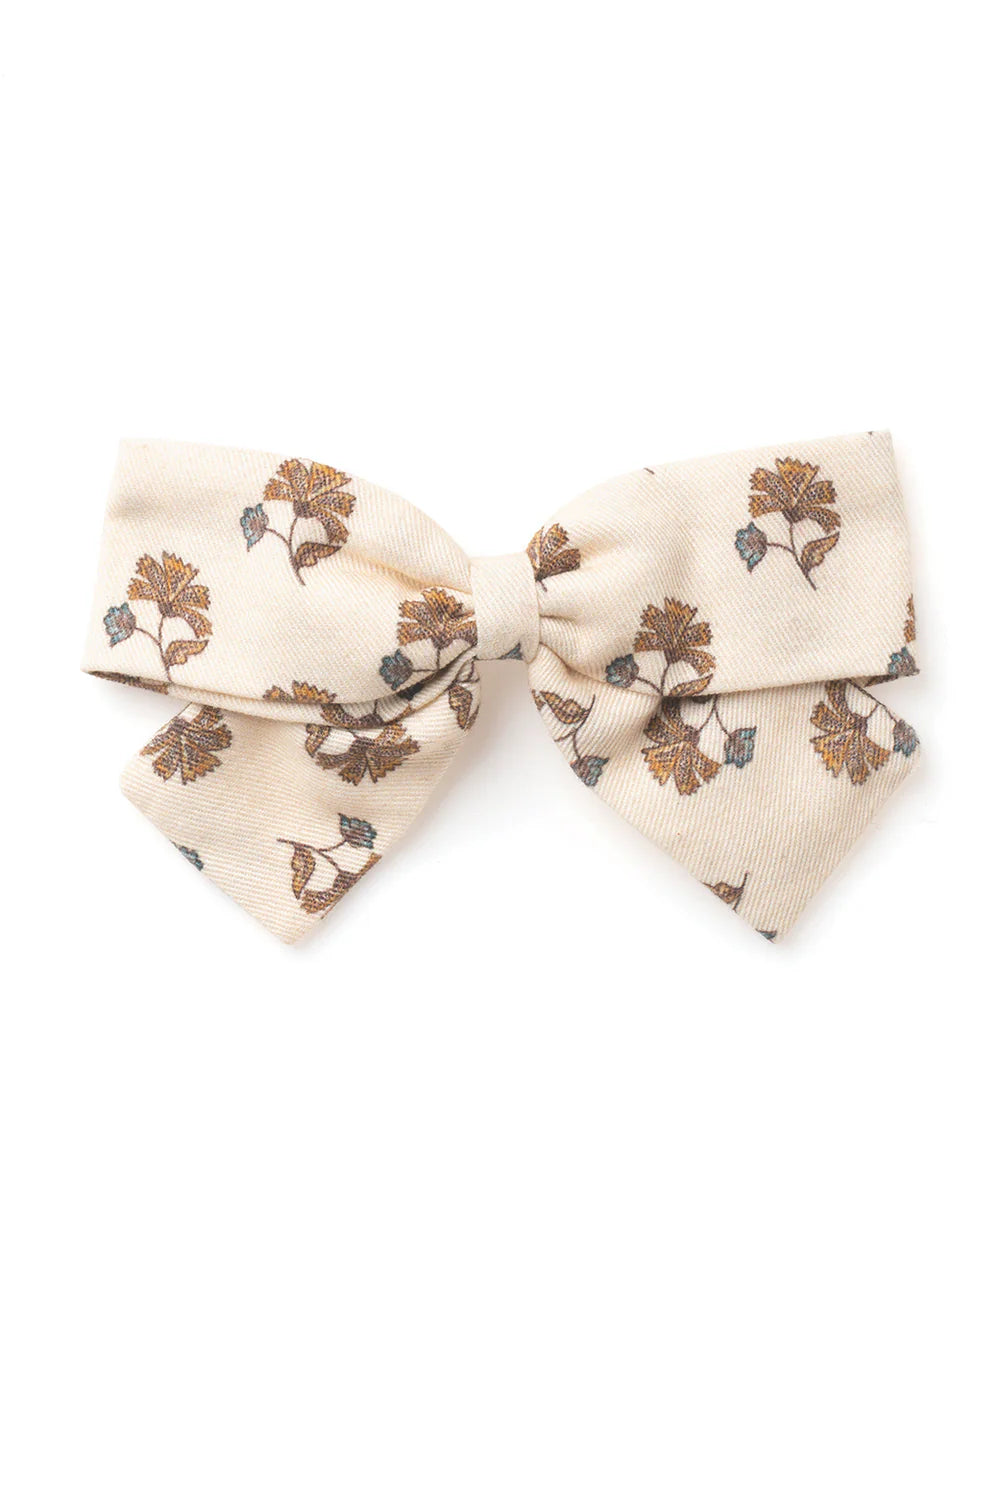 Big Bow - Textured Floral